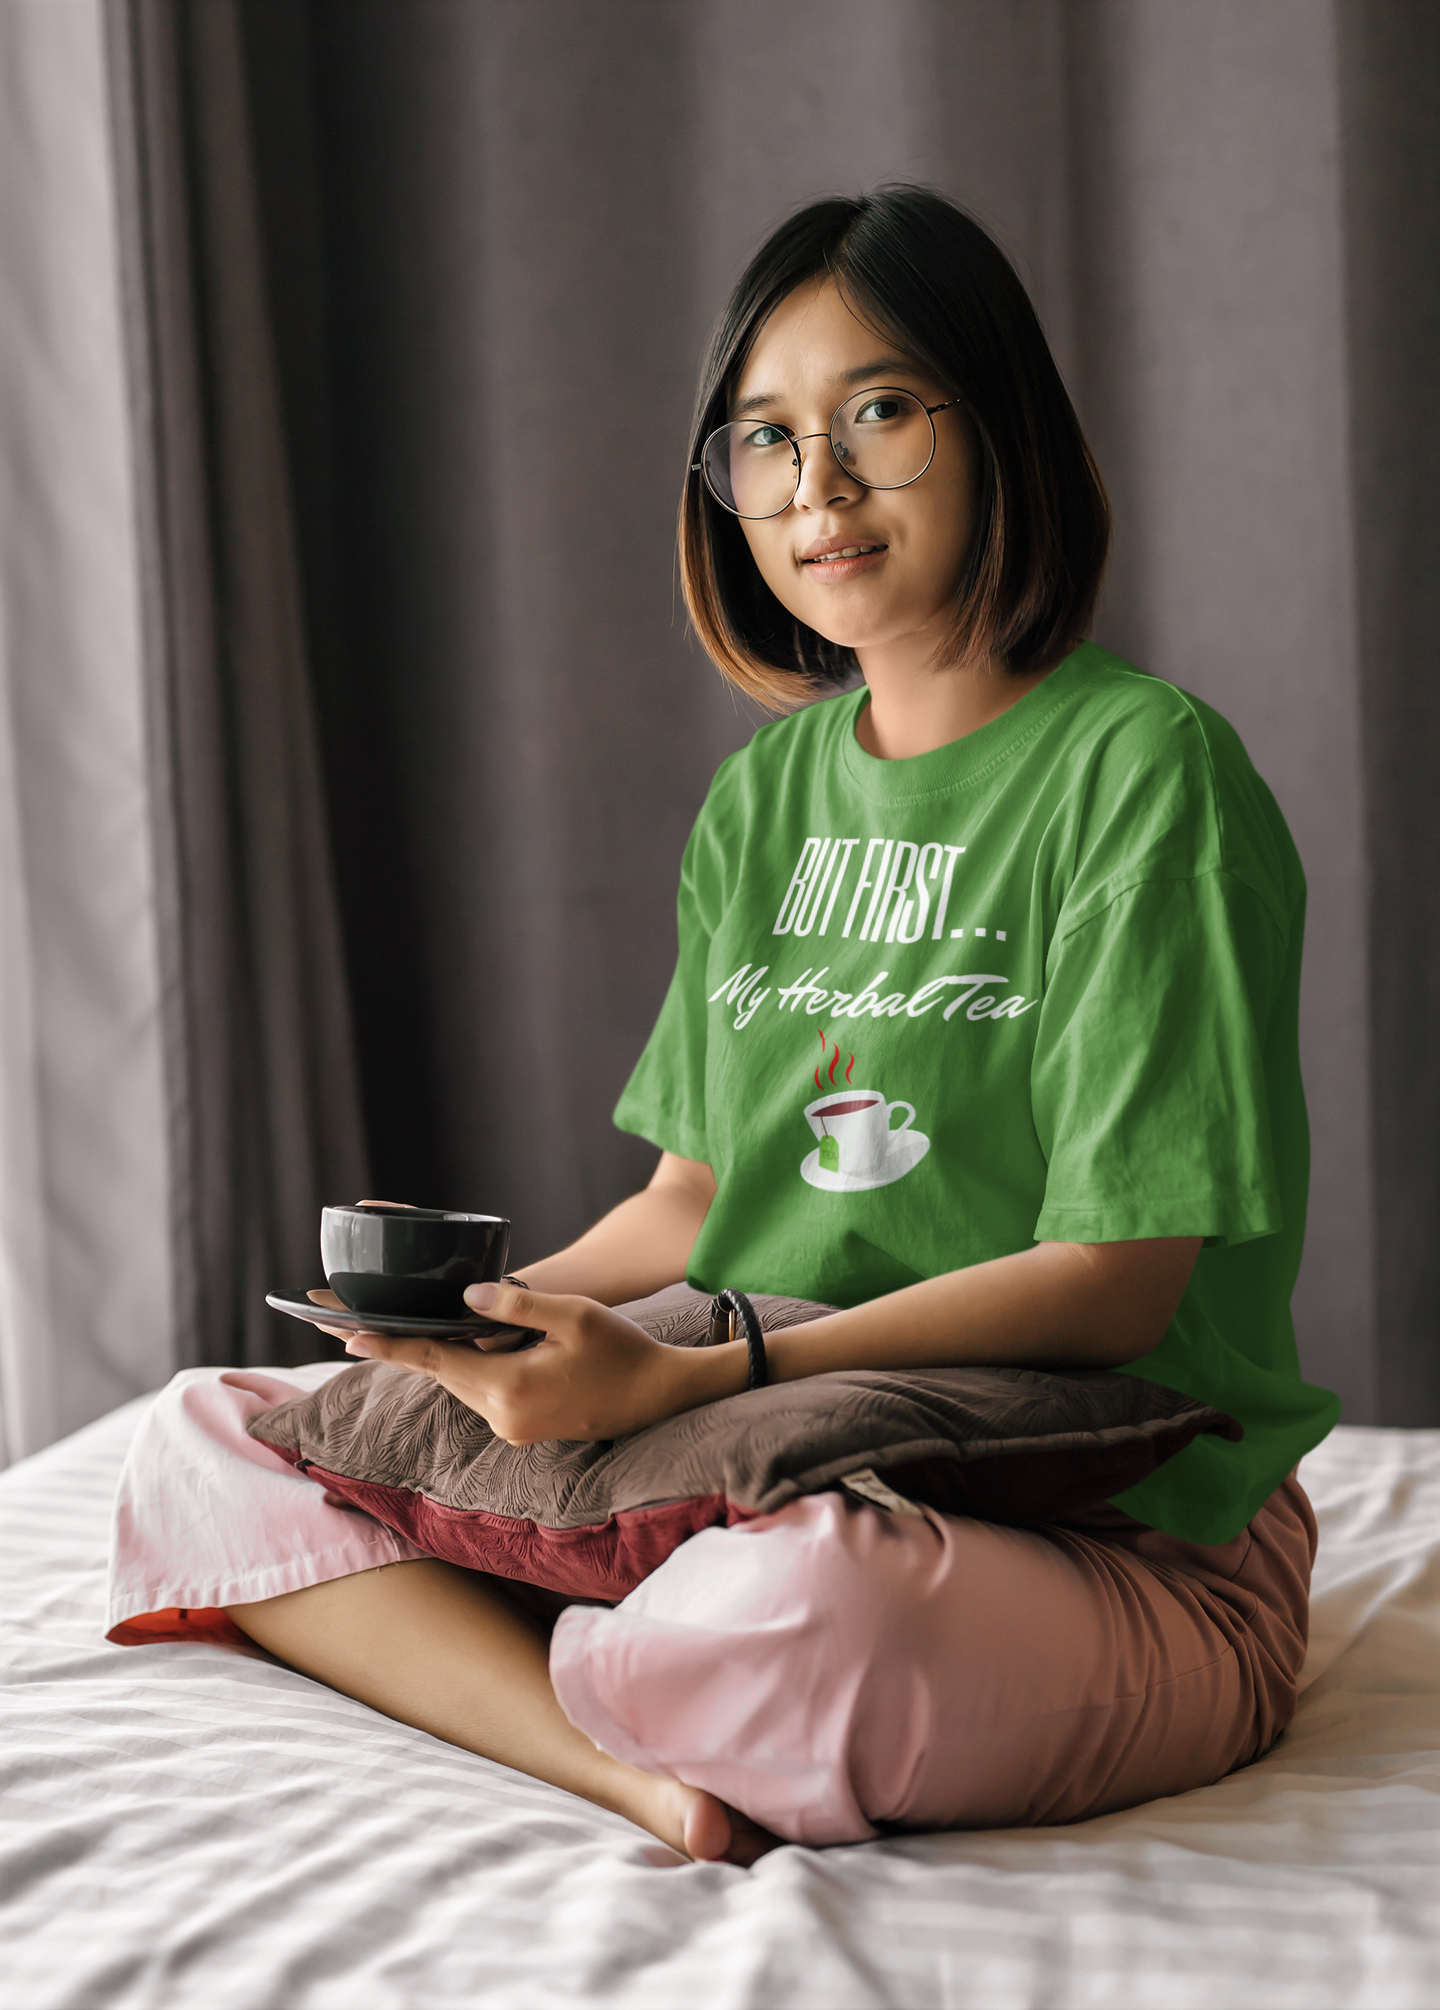 oversize-t-shirt-mockup-of-a-woman-with-glasses-having-tea-on-her-bed-m4668-r-el2.png